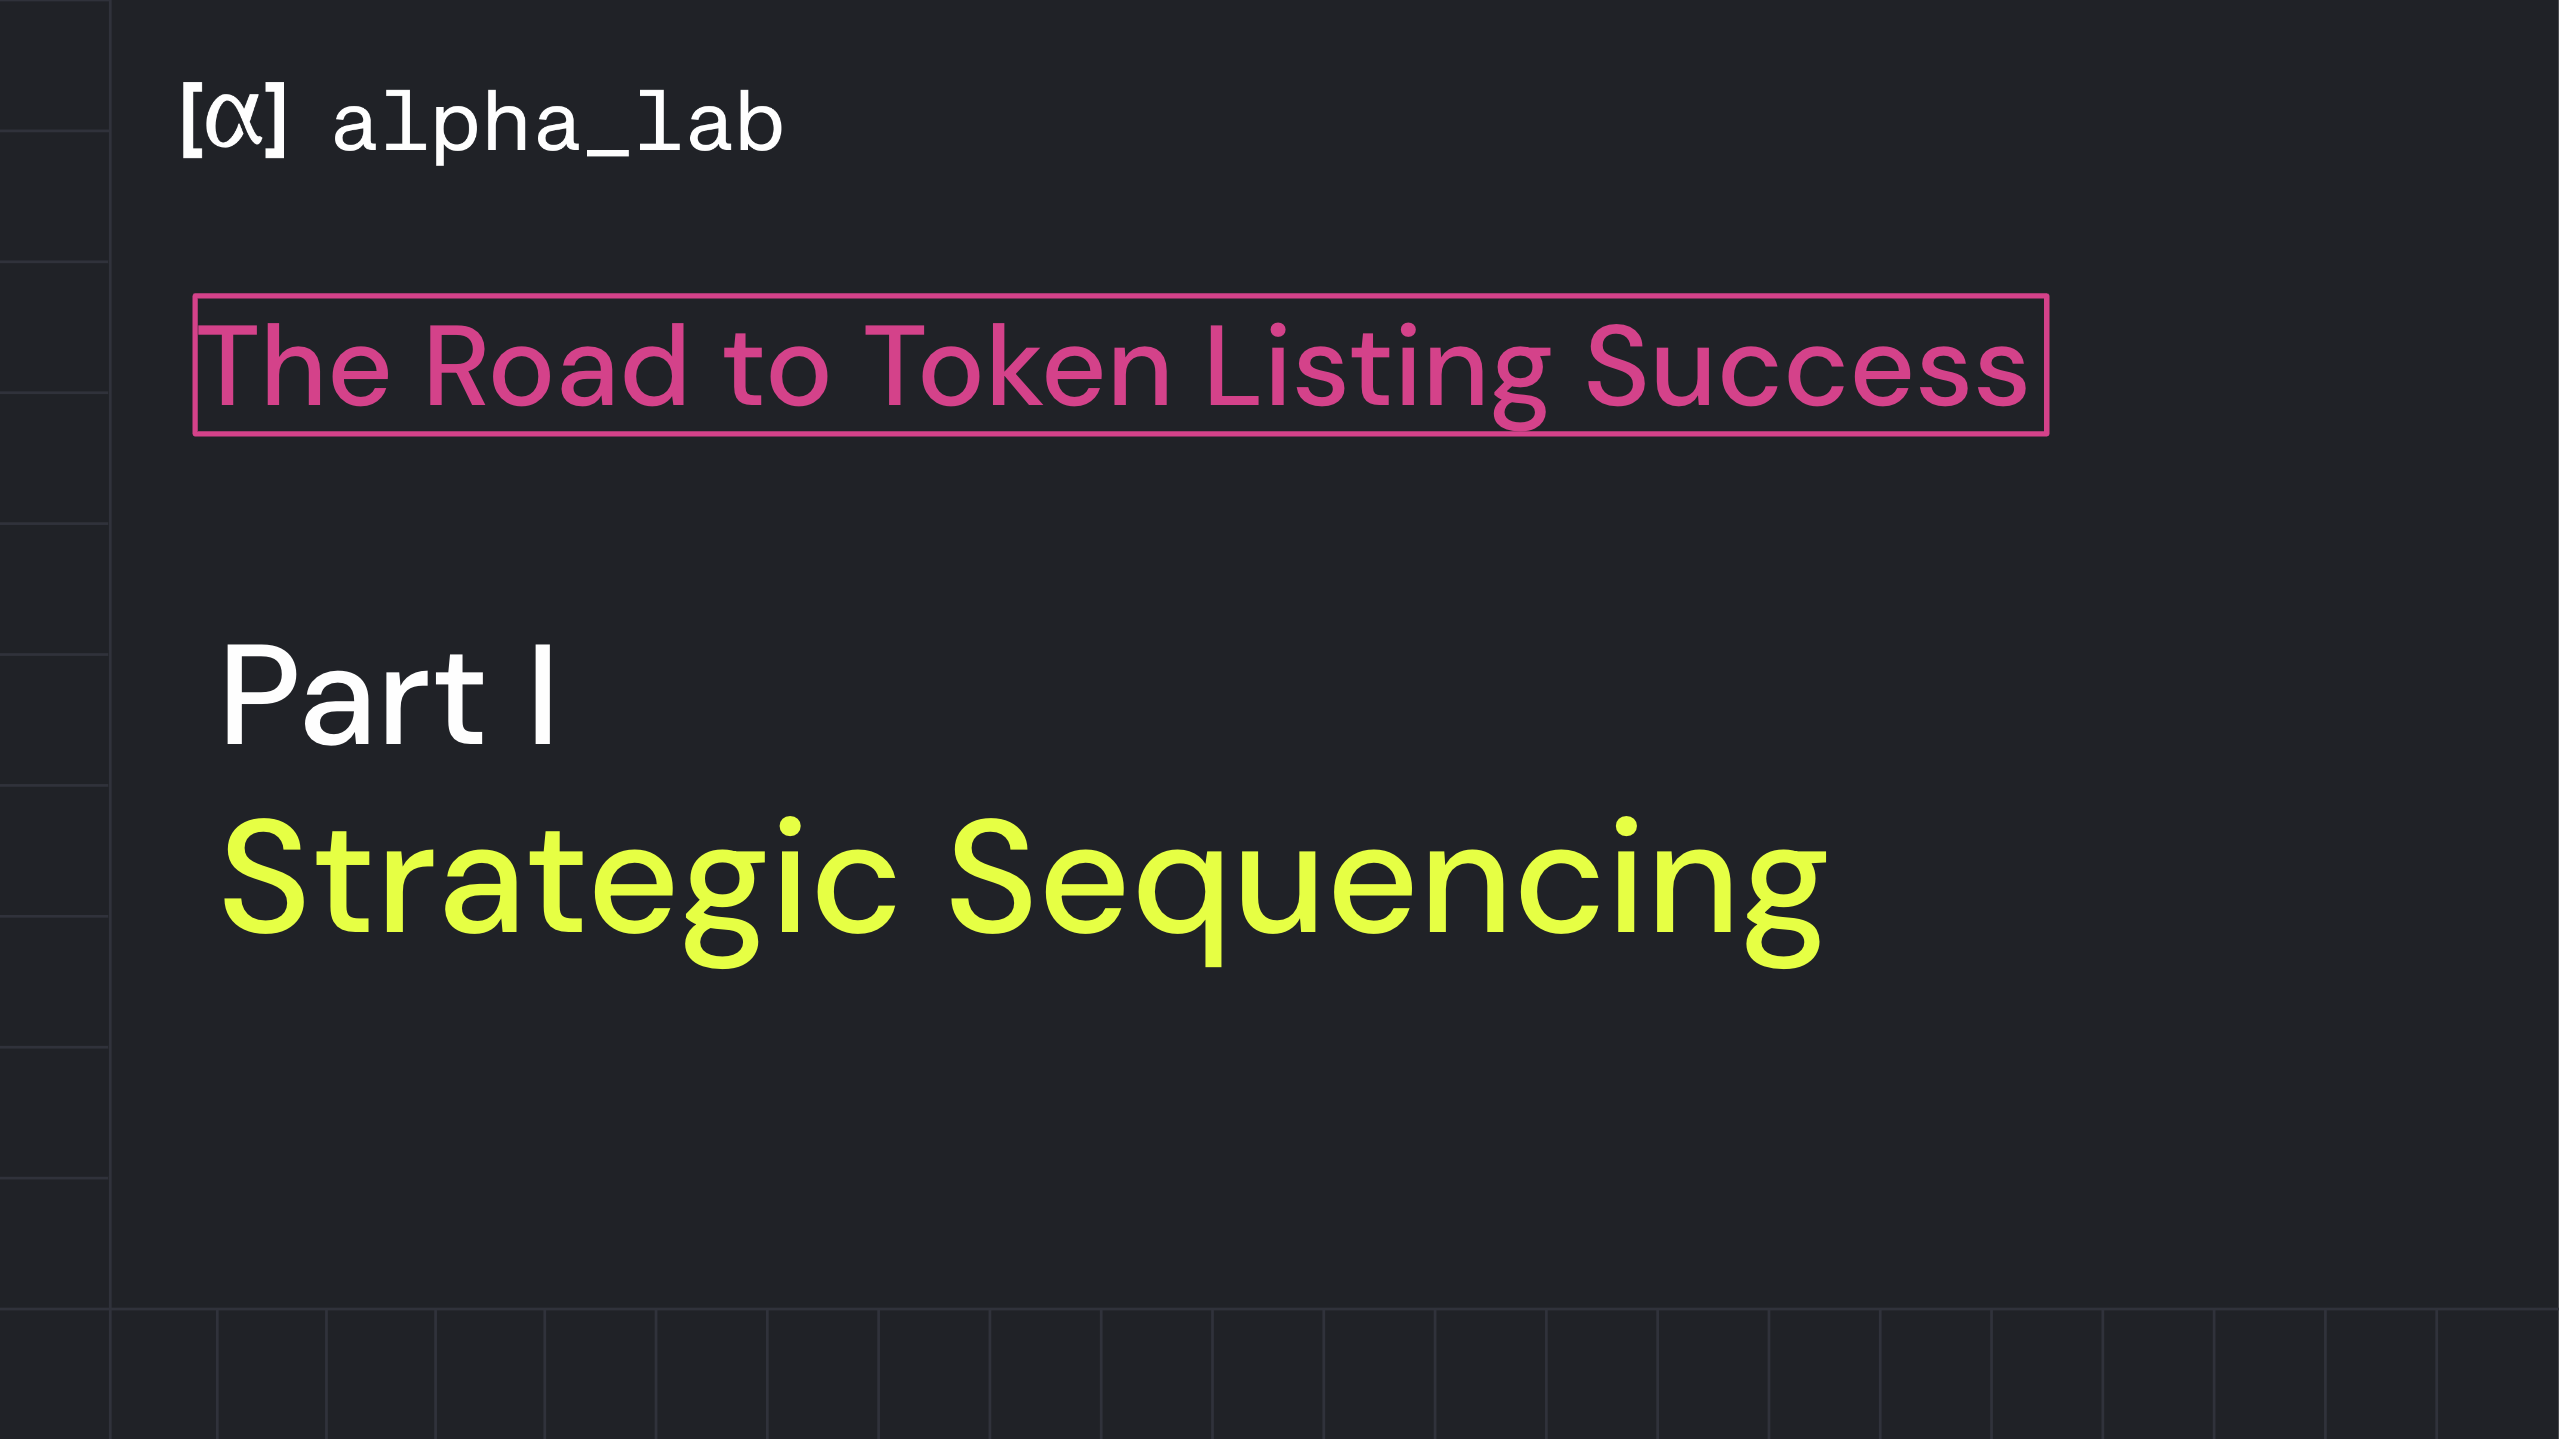 The Road to Token Listing Success Part I: Strategic Sequencing